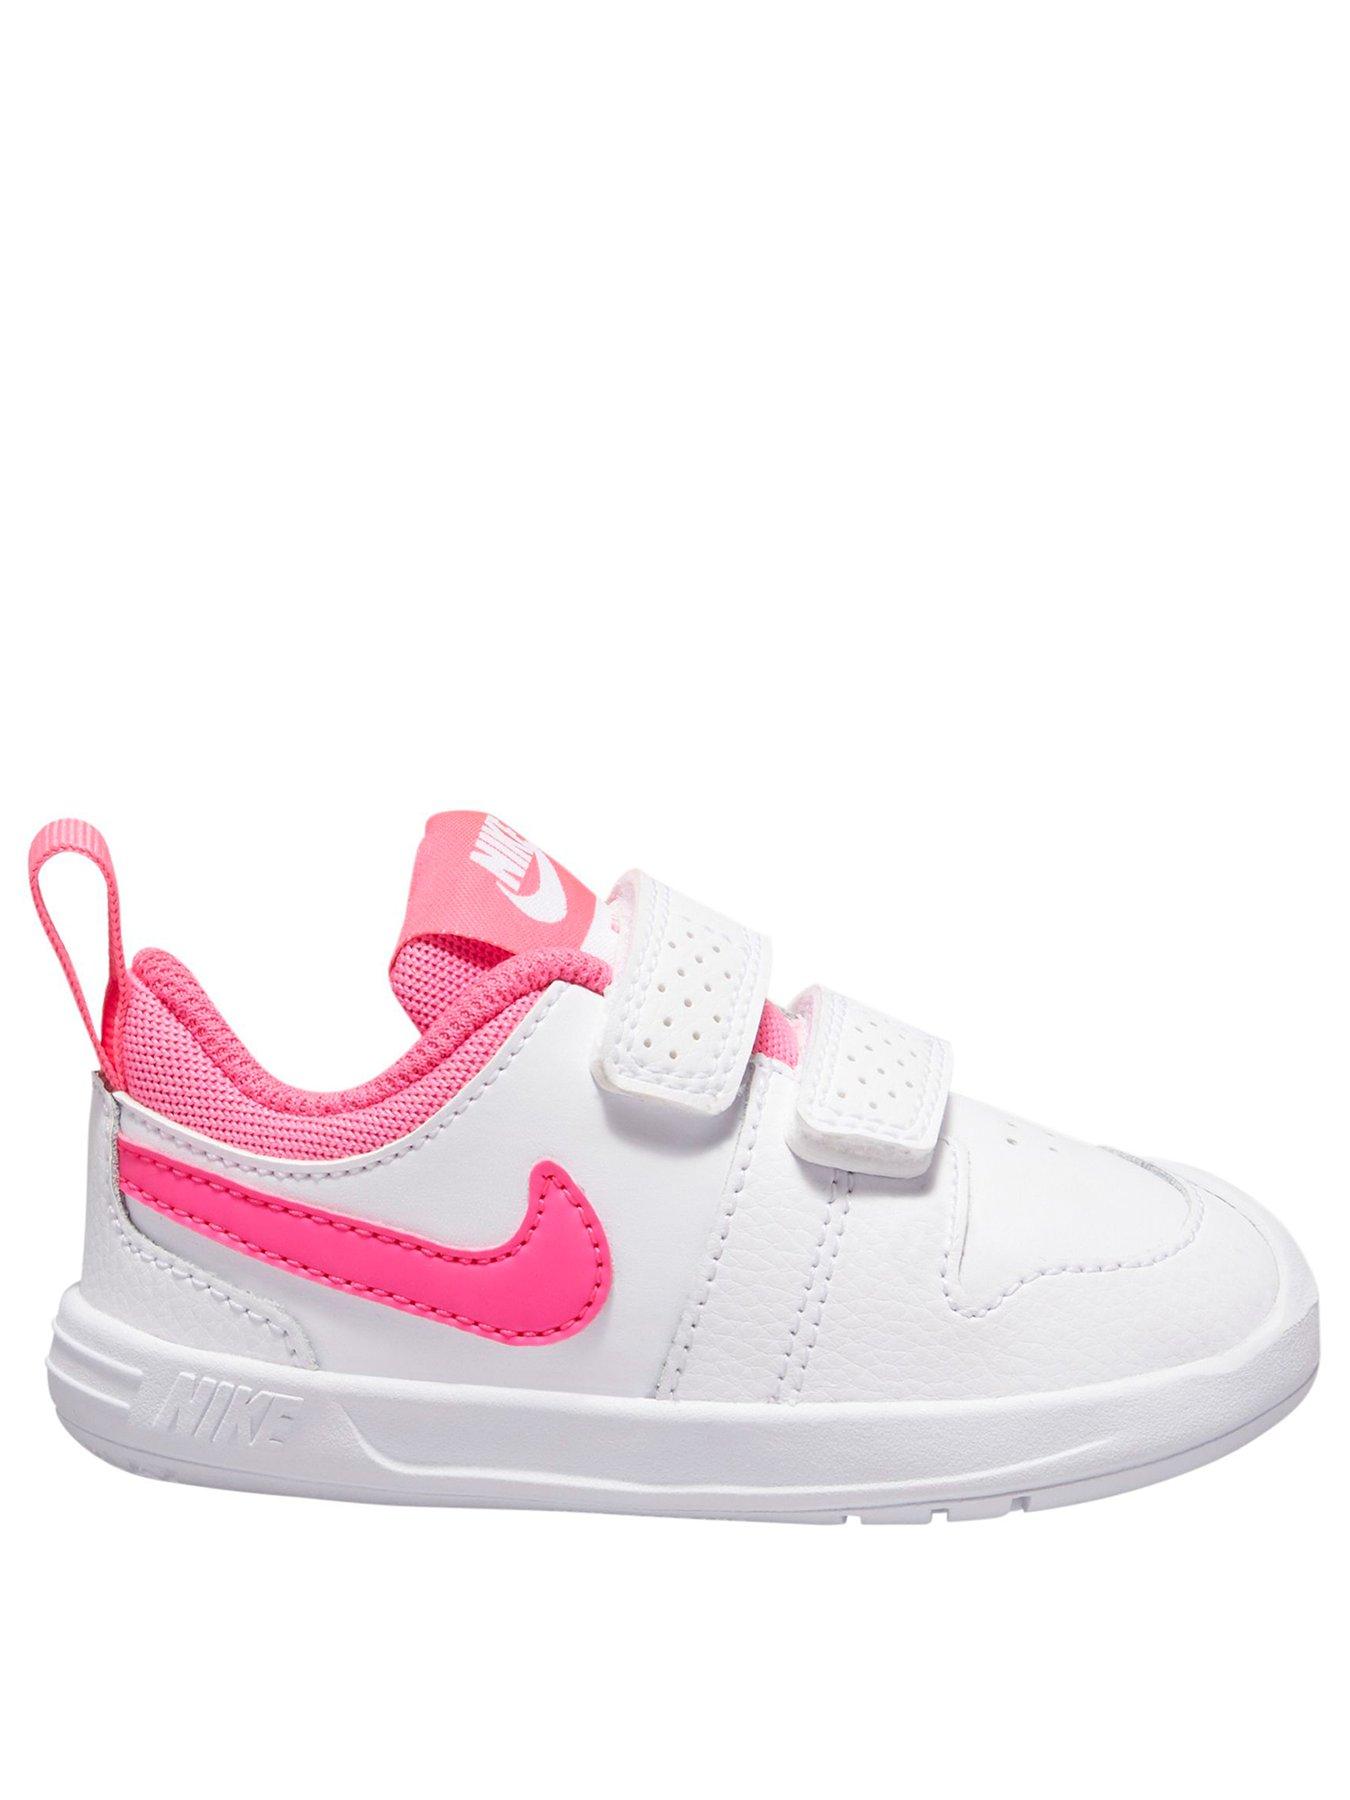 baby size 5 nike trainers